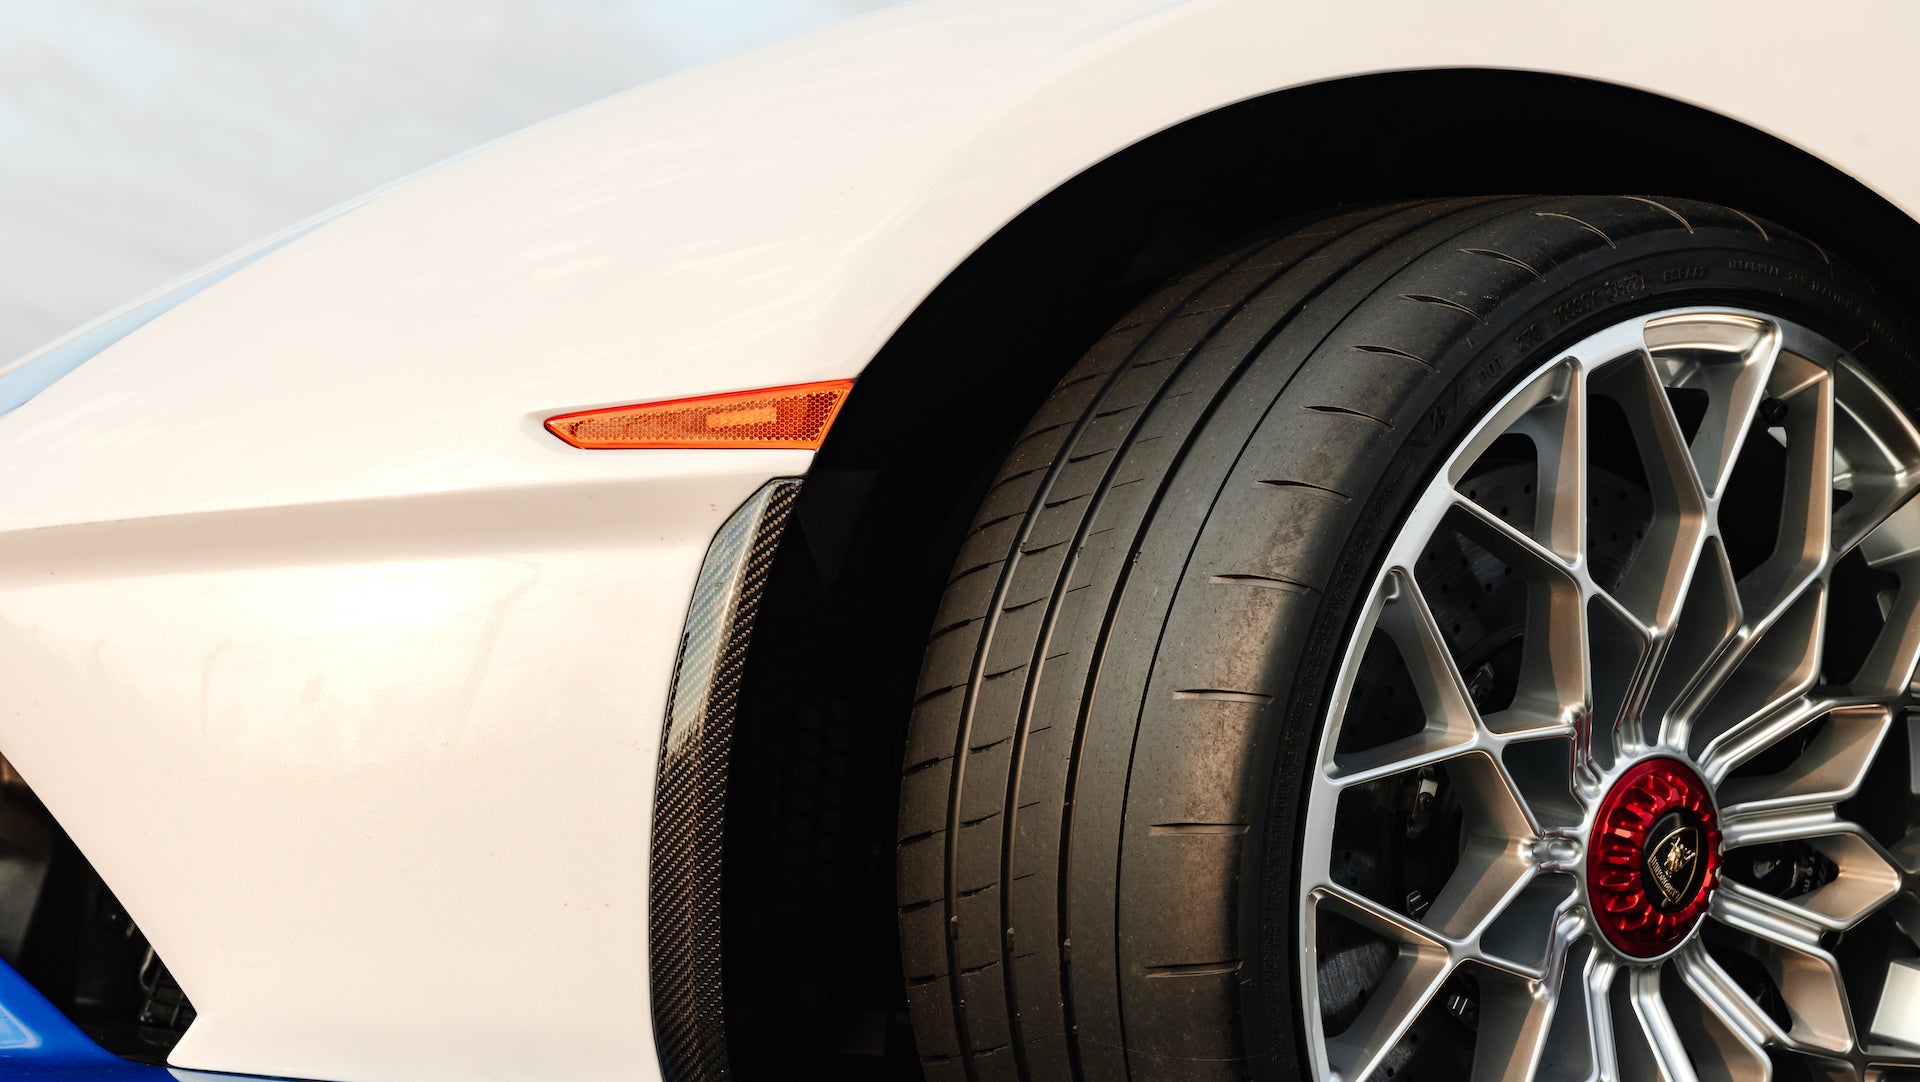 ExoForma, Car Guys, and more: Shop the best tire shines to get